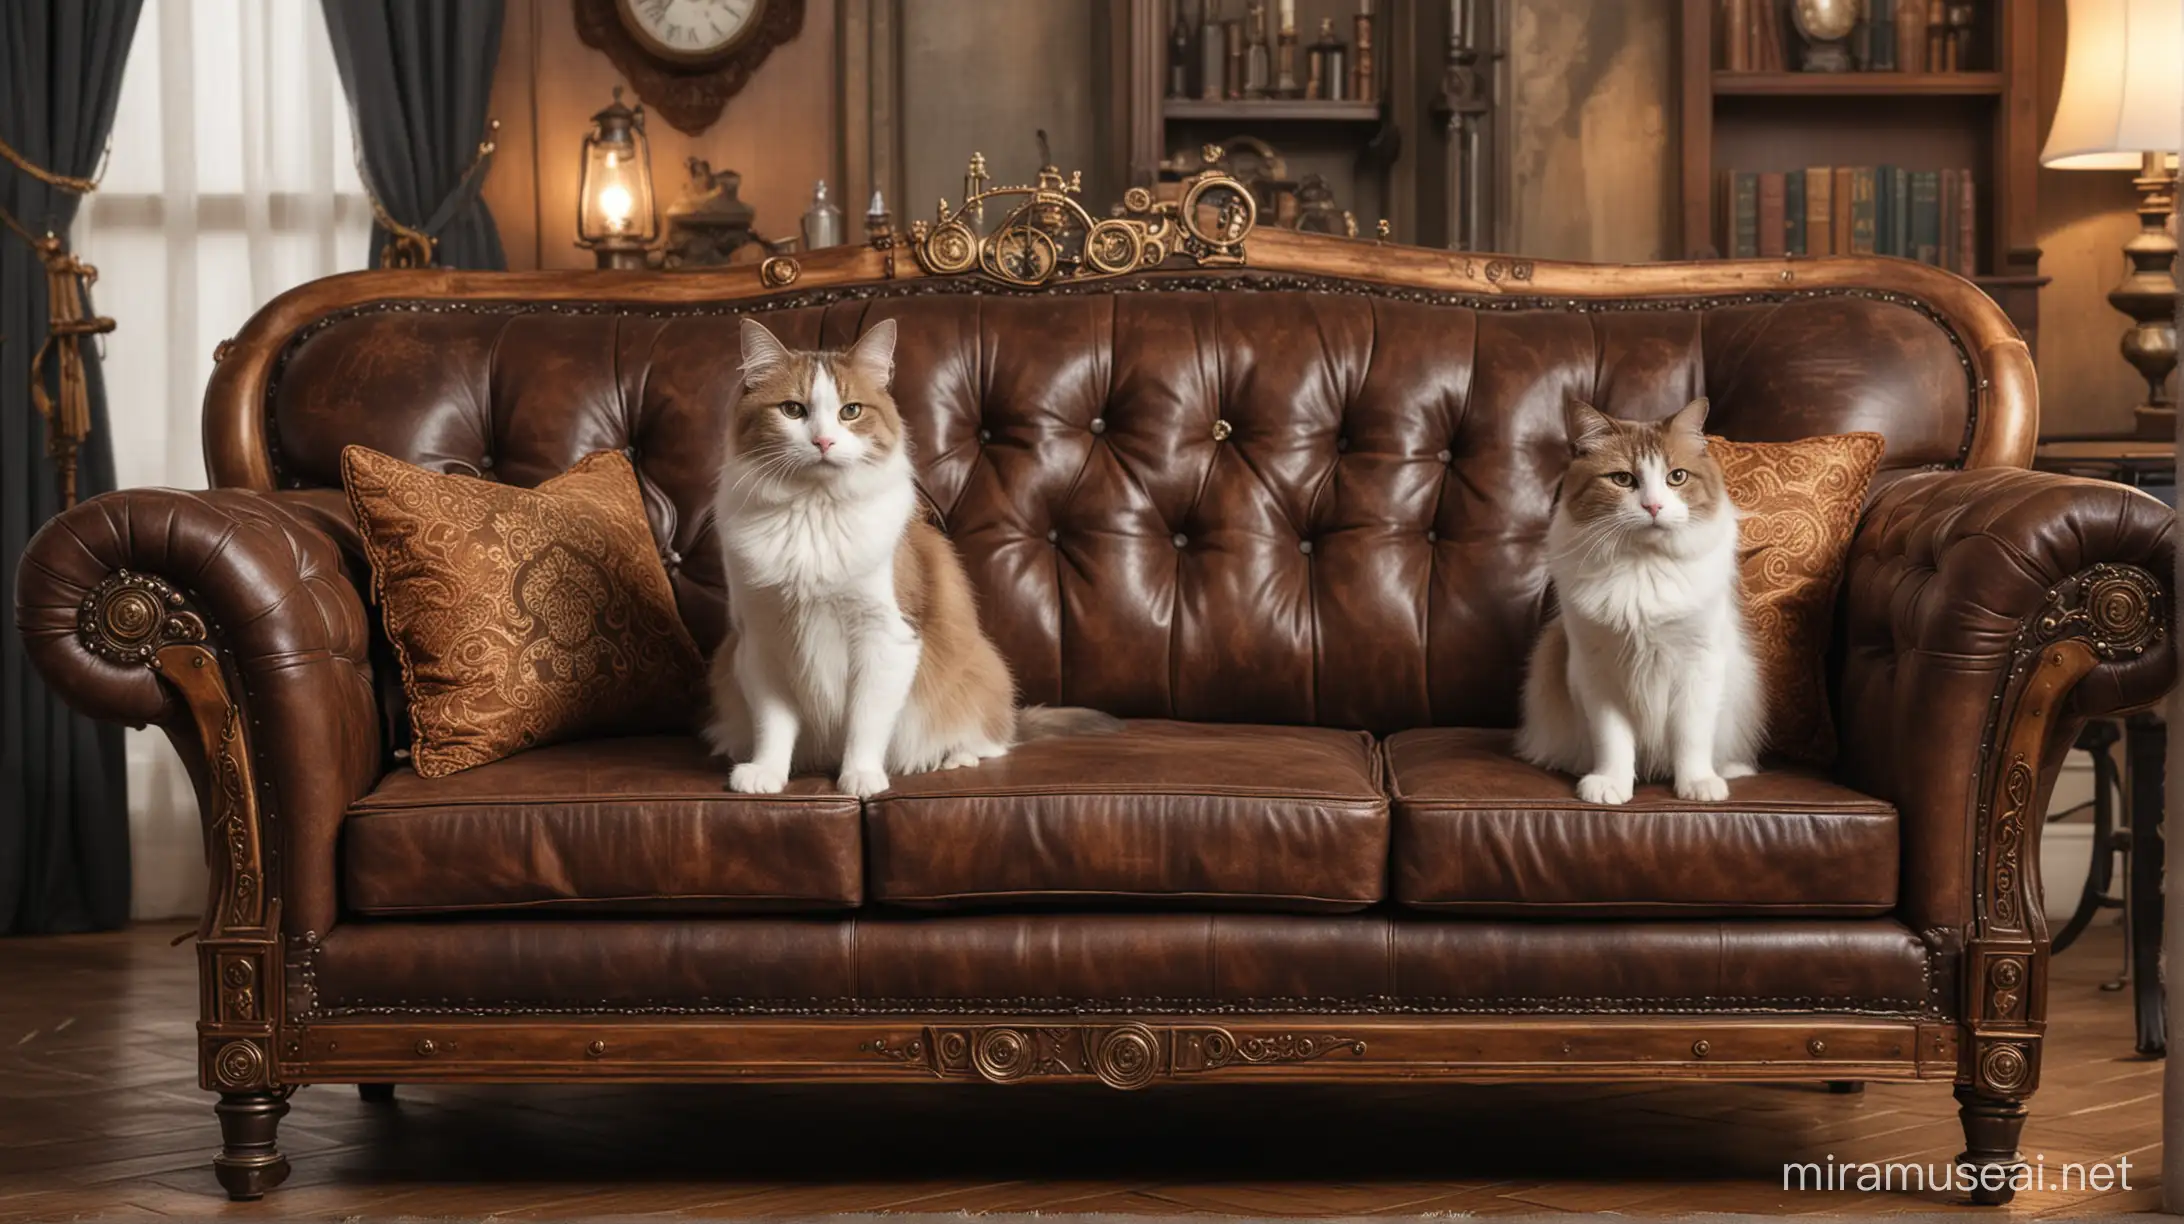 the dog and the cat sit on an elegant sofa in a steampunk living room